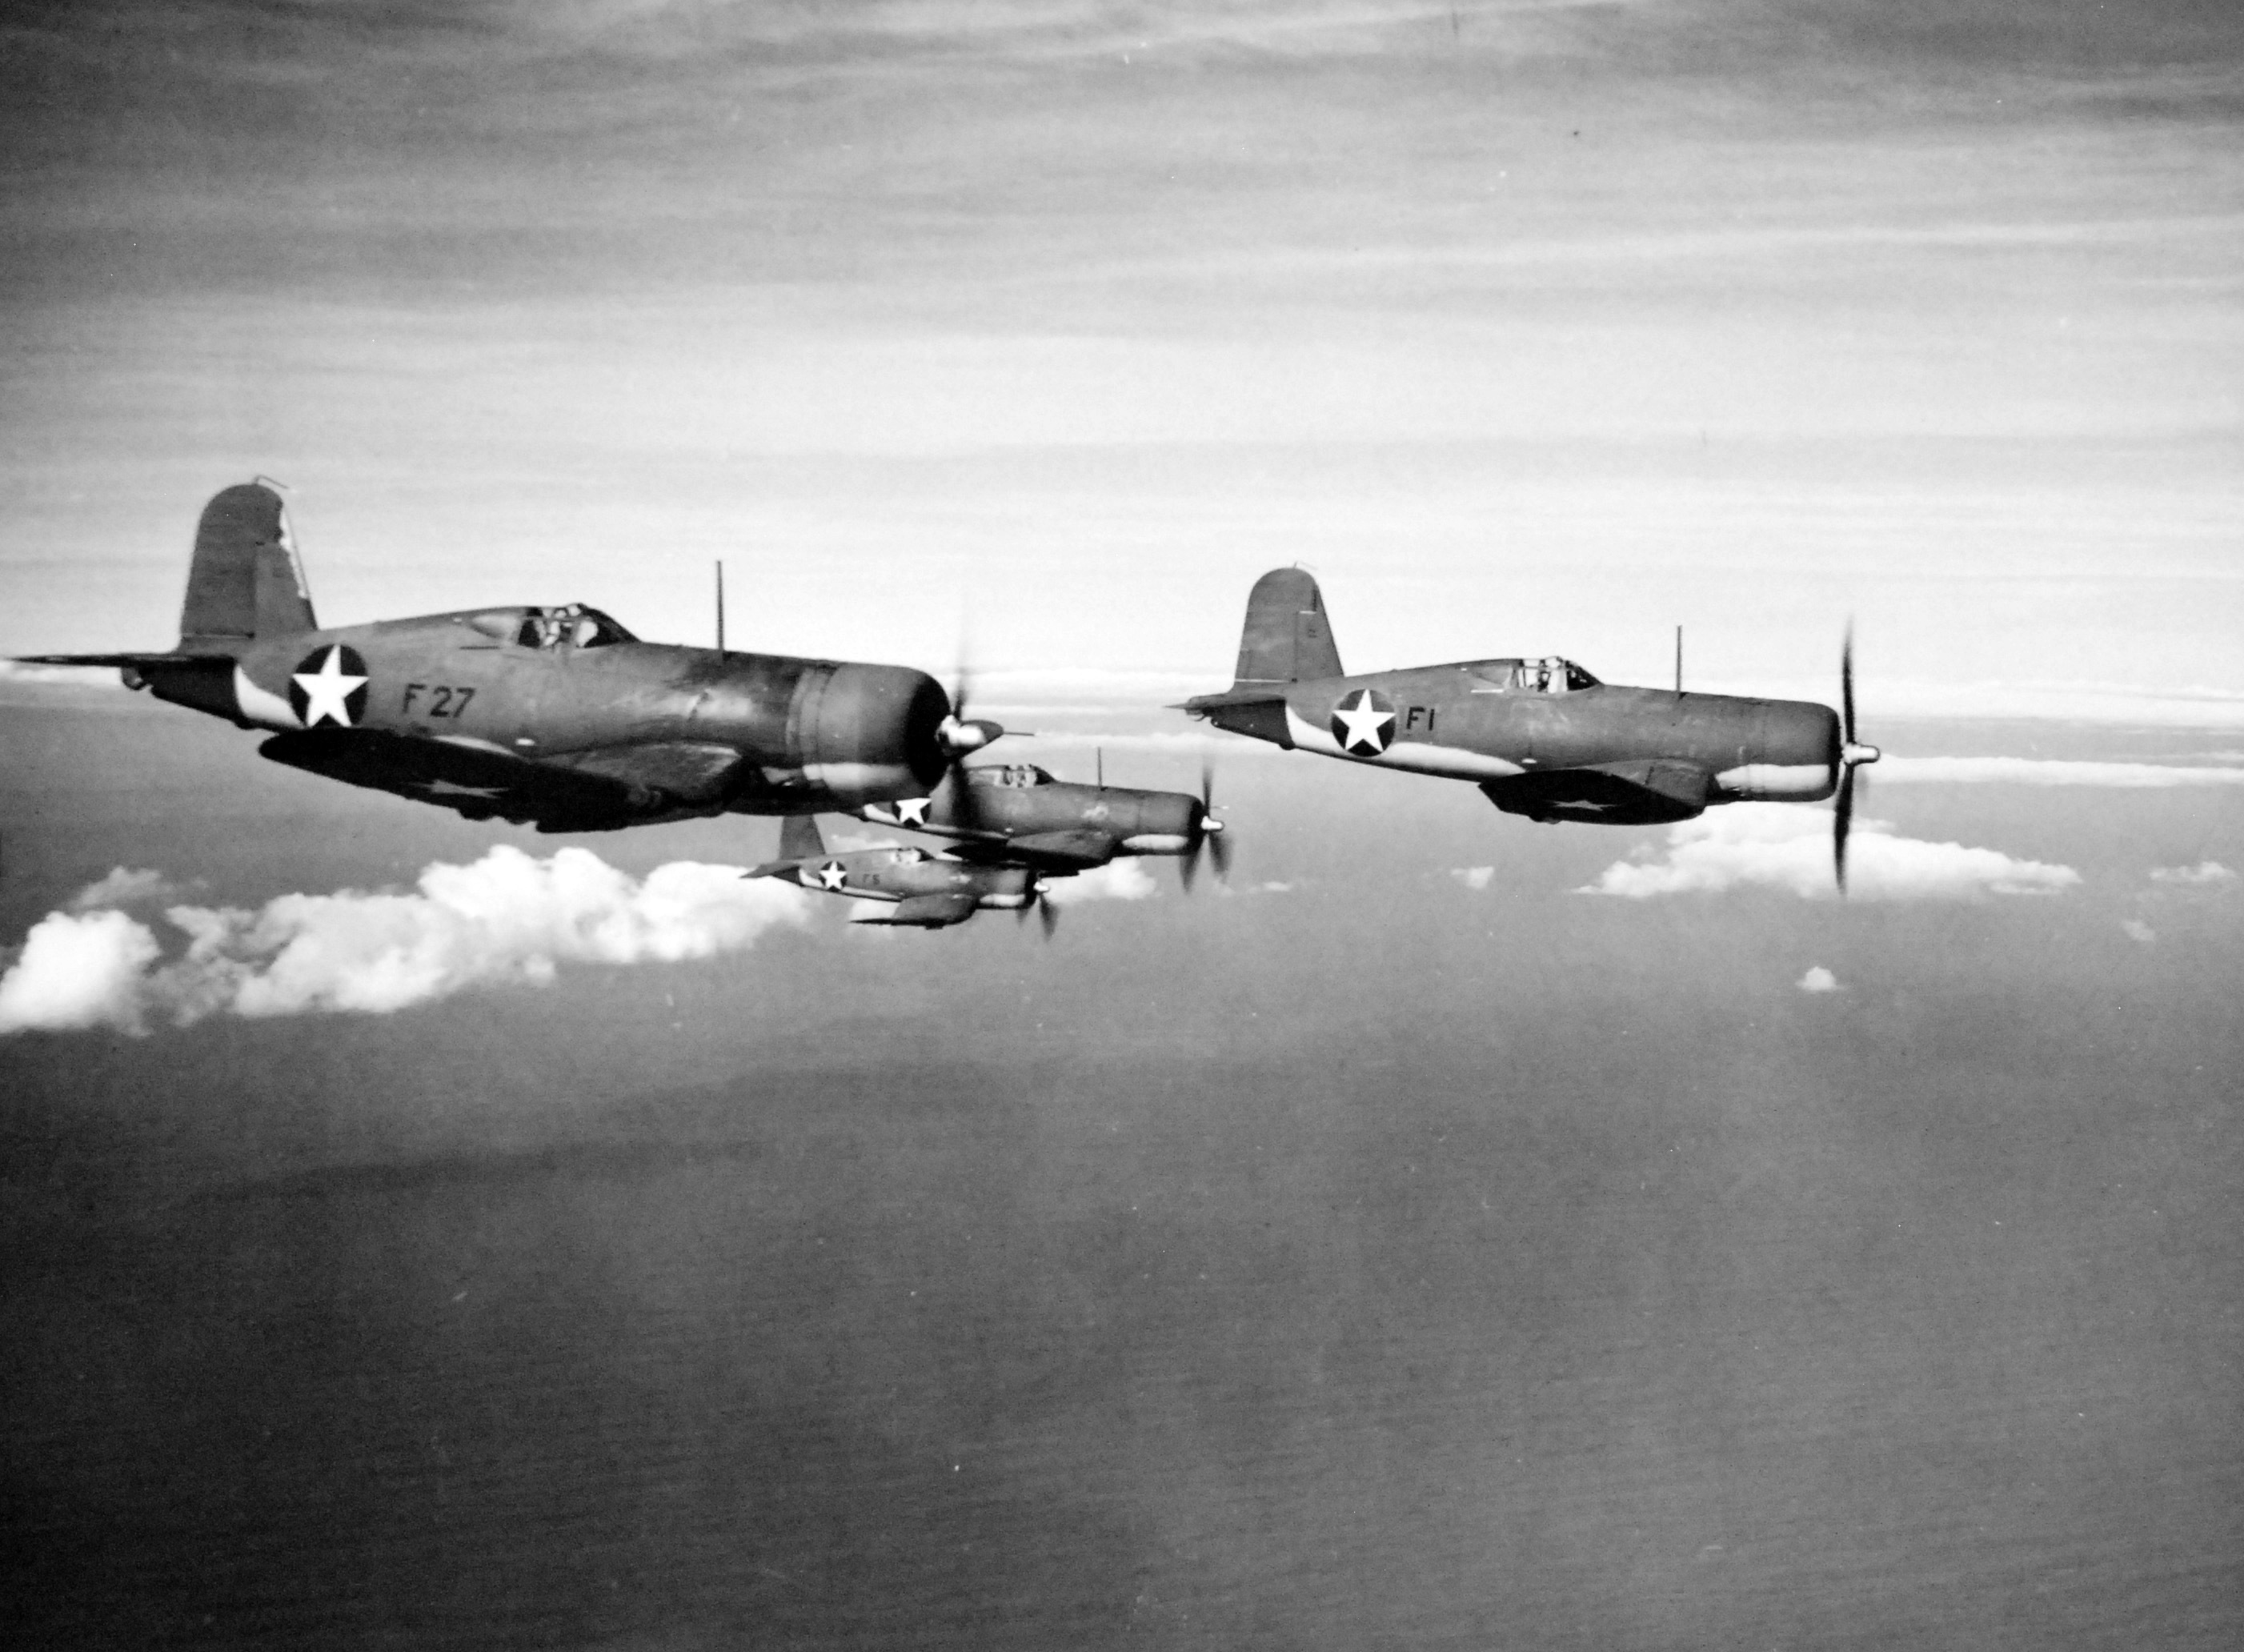 Four F4U Corsair fighters practicing aerial maneuvers, Mar-May 1943; probably stateside training. Photo 1 of 2.